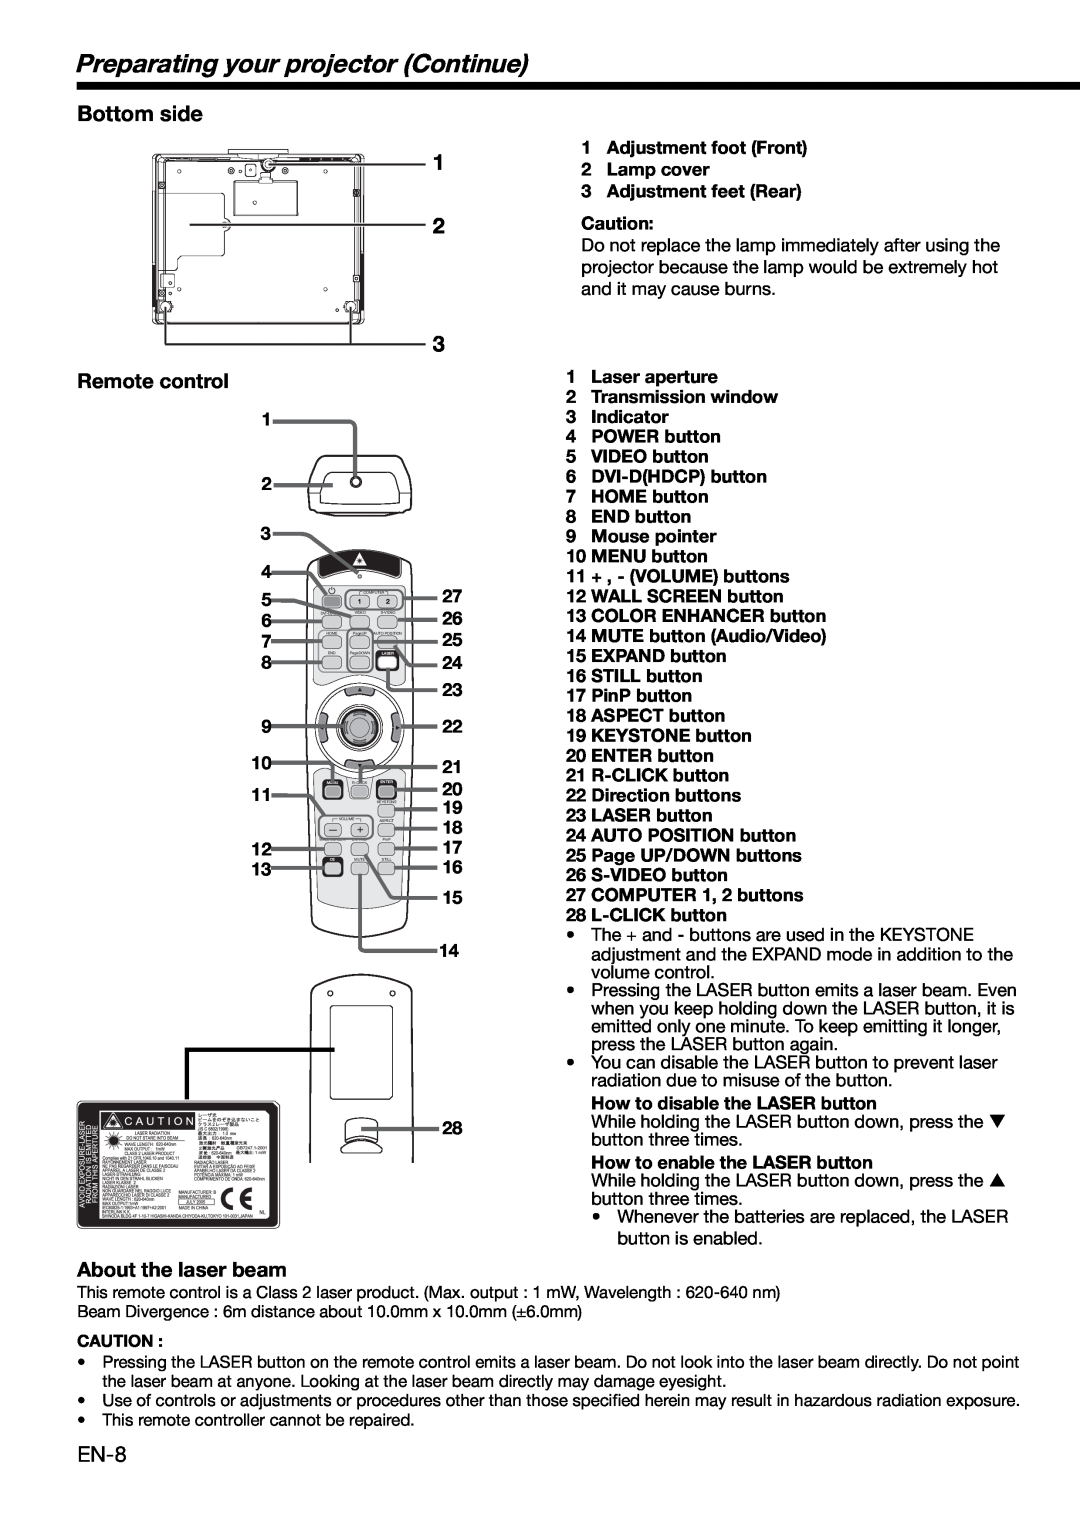 Mitsubishi Electronics XD460U user manual Preparating your projector Continue, Remote control, About the laser beam 